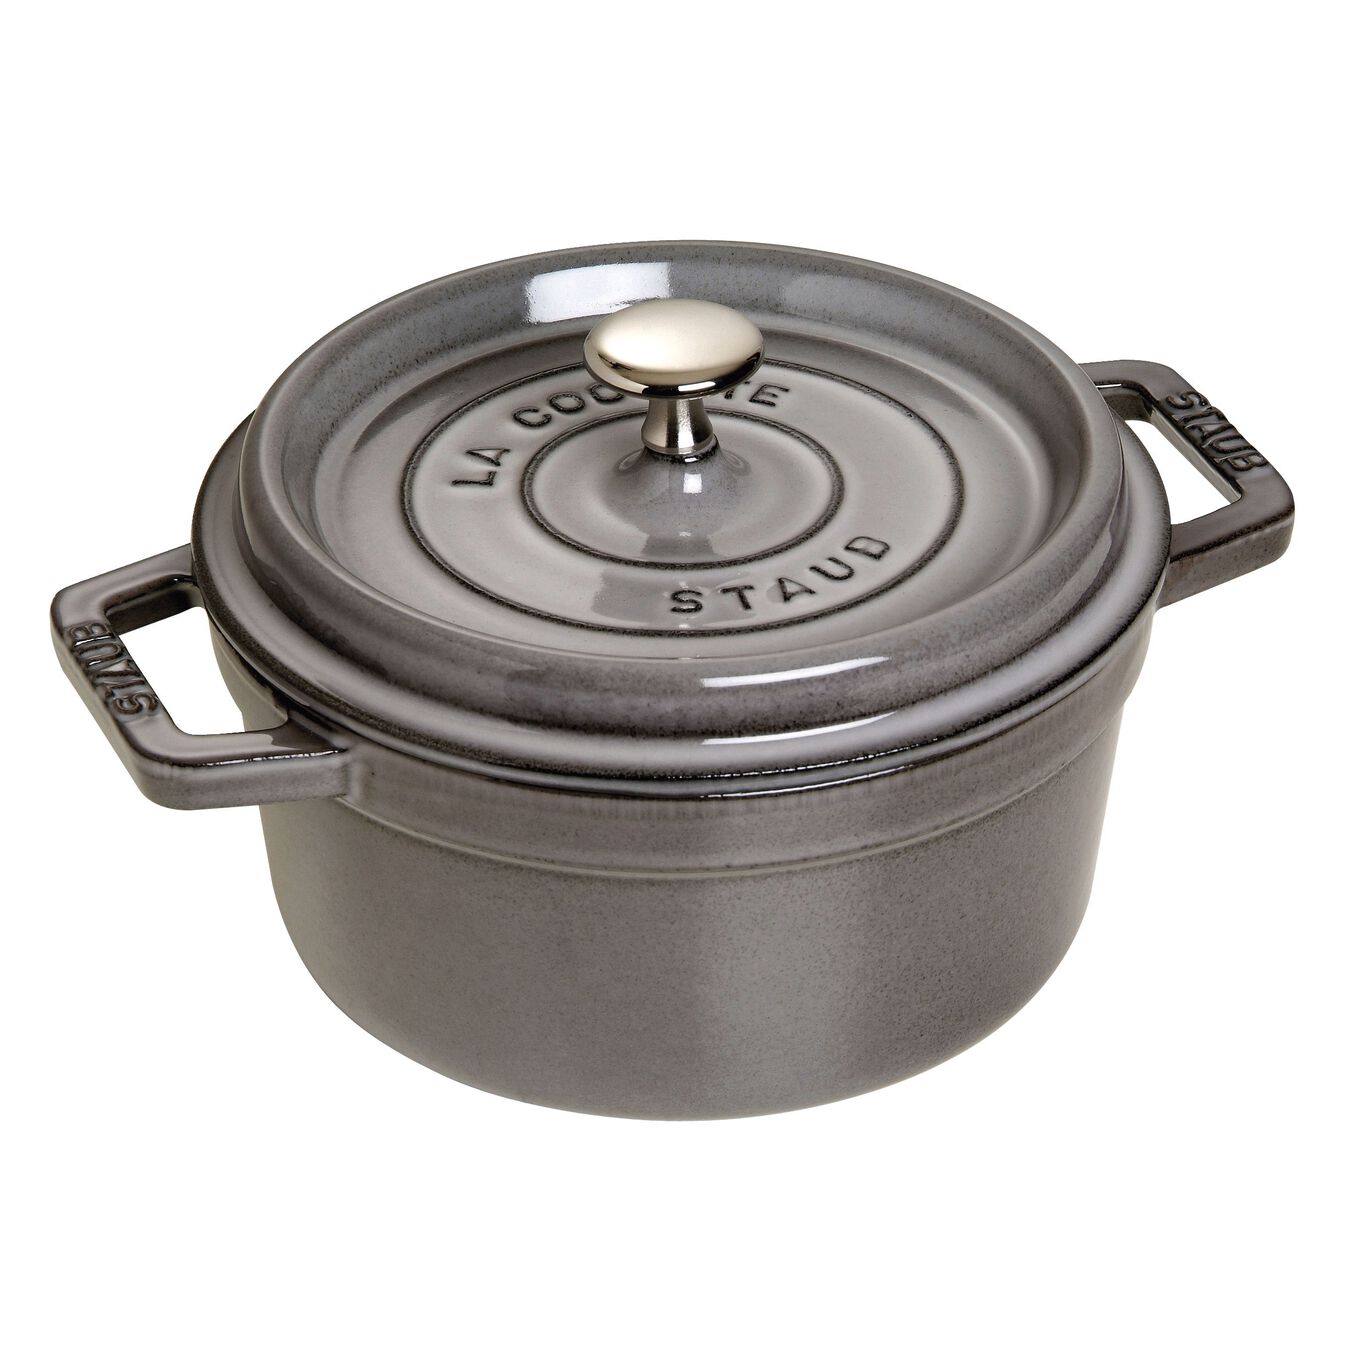 Shop Staub Cast Iron Crepe Pan with Spreader and Spatula at WT